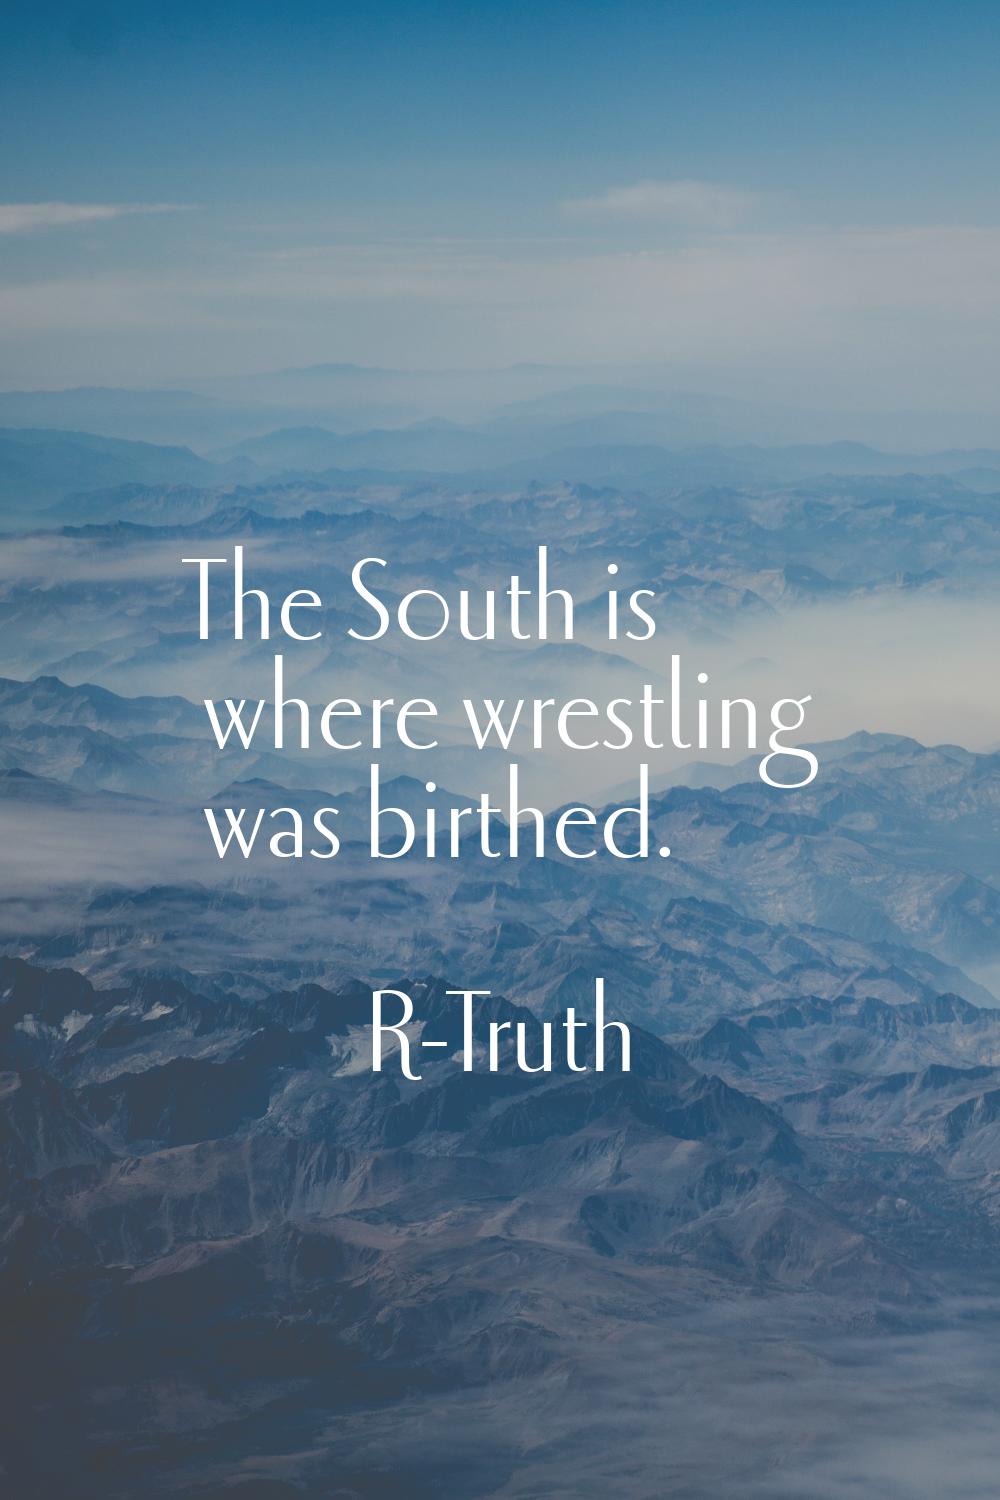 The South is where wrestling was birthed.